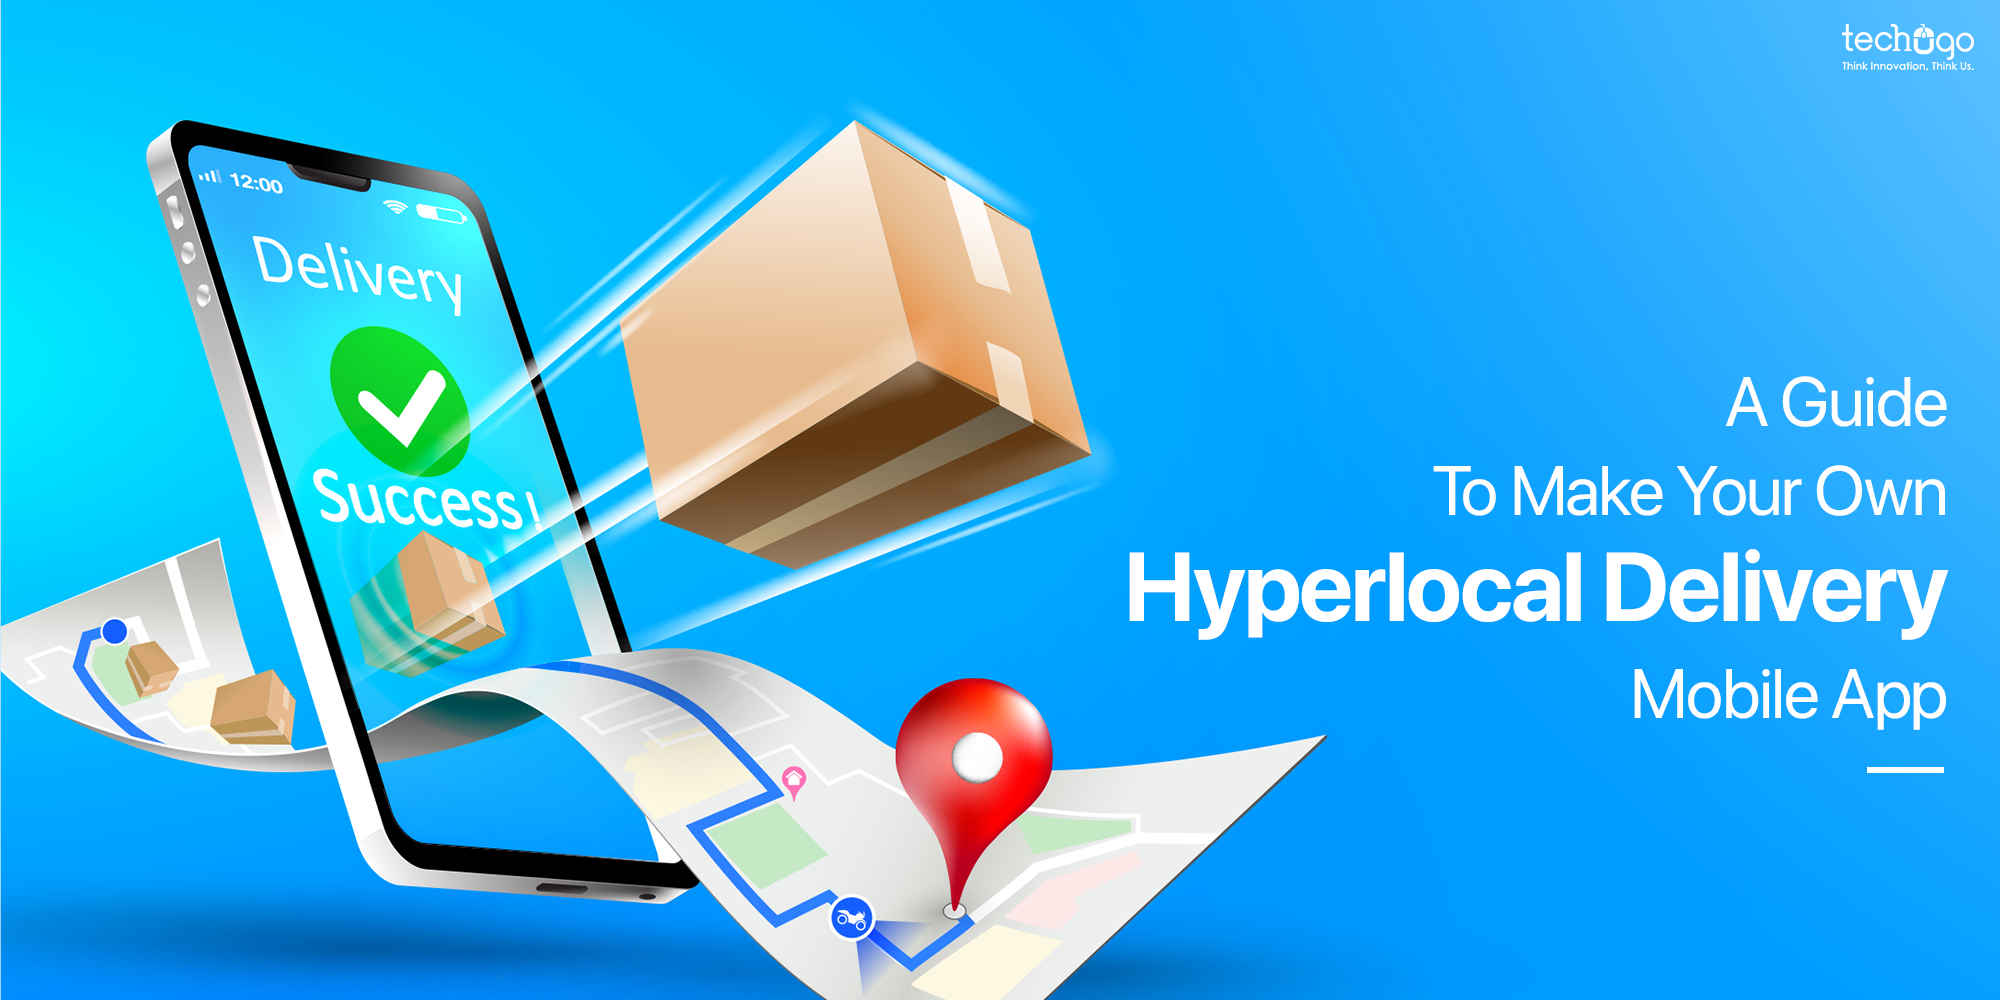 A Guide To Make Your Own Hyperlocal Delivery Mobile App